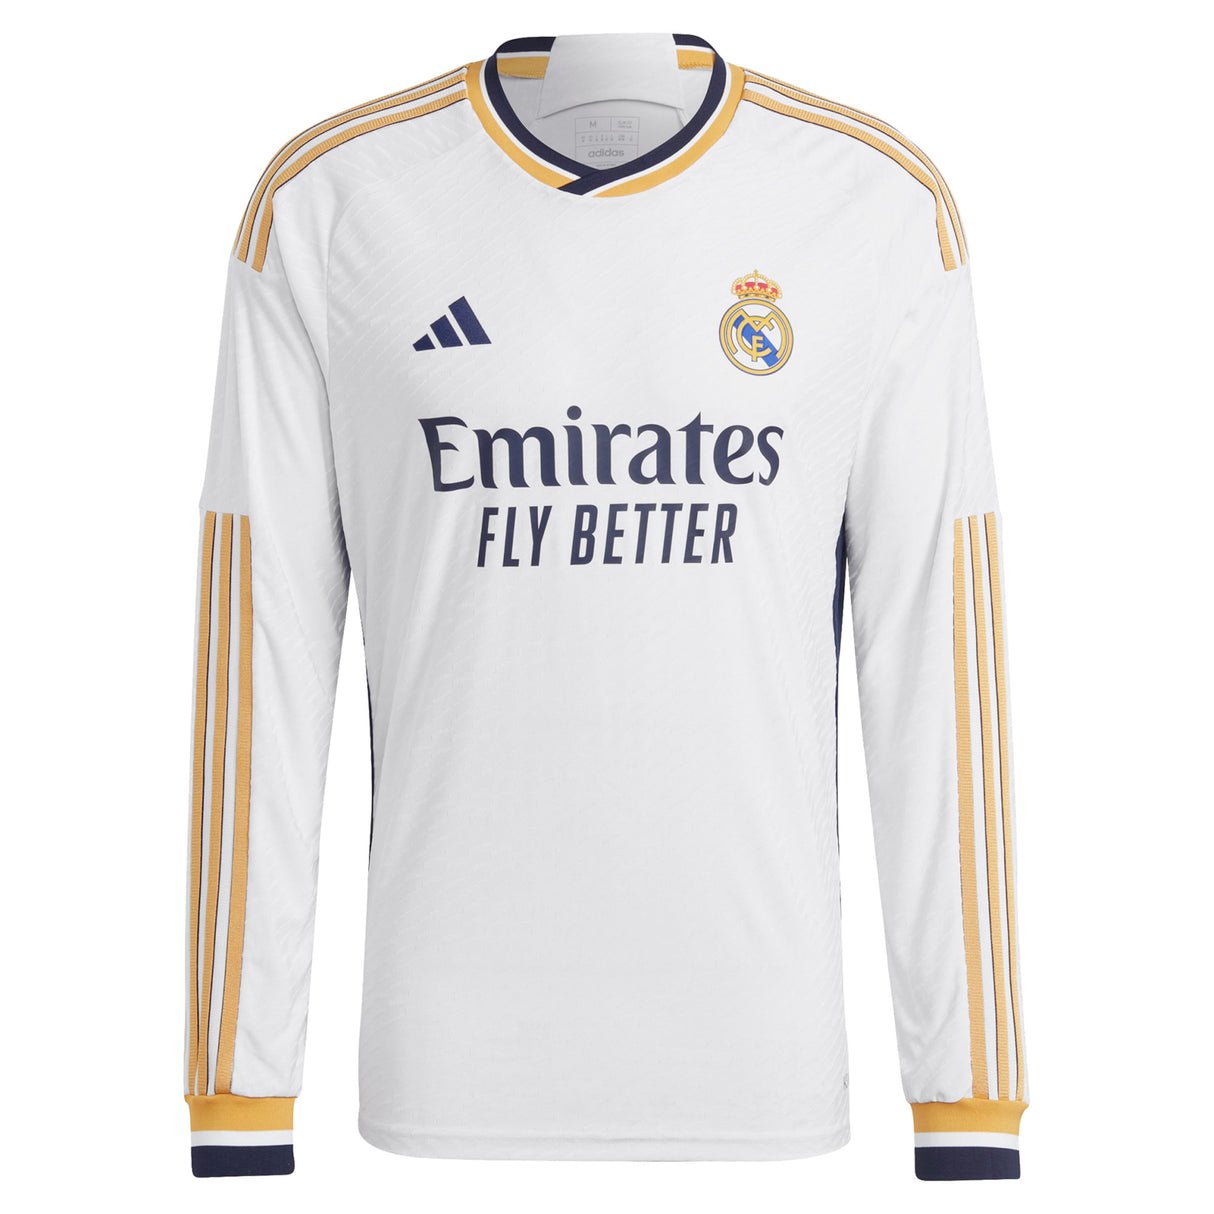 Real Madrid adidas Home Authentic Shirt 2023-24 - Long Sleeve with Tchouaméni 18 printing - Kit Captain